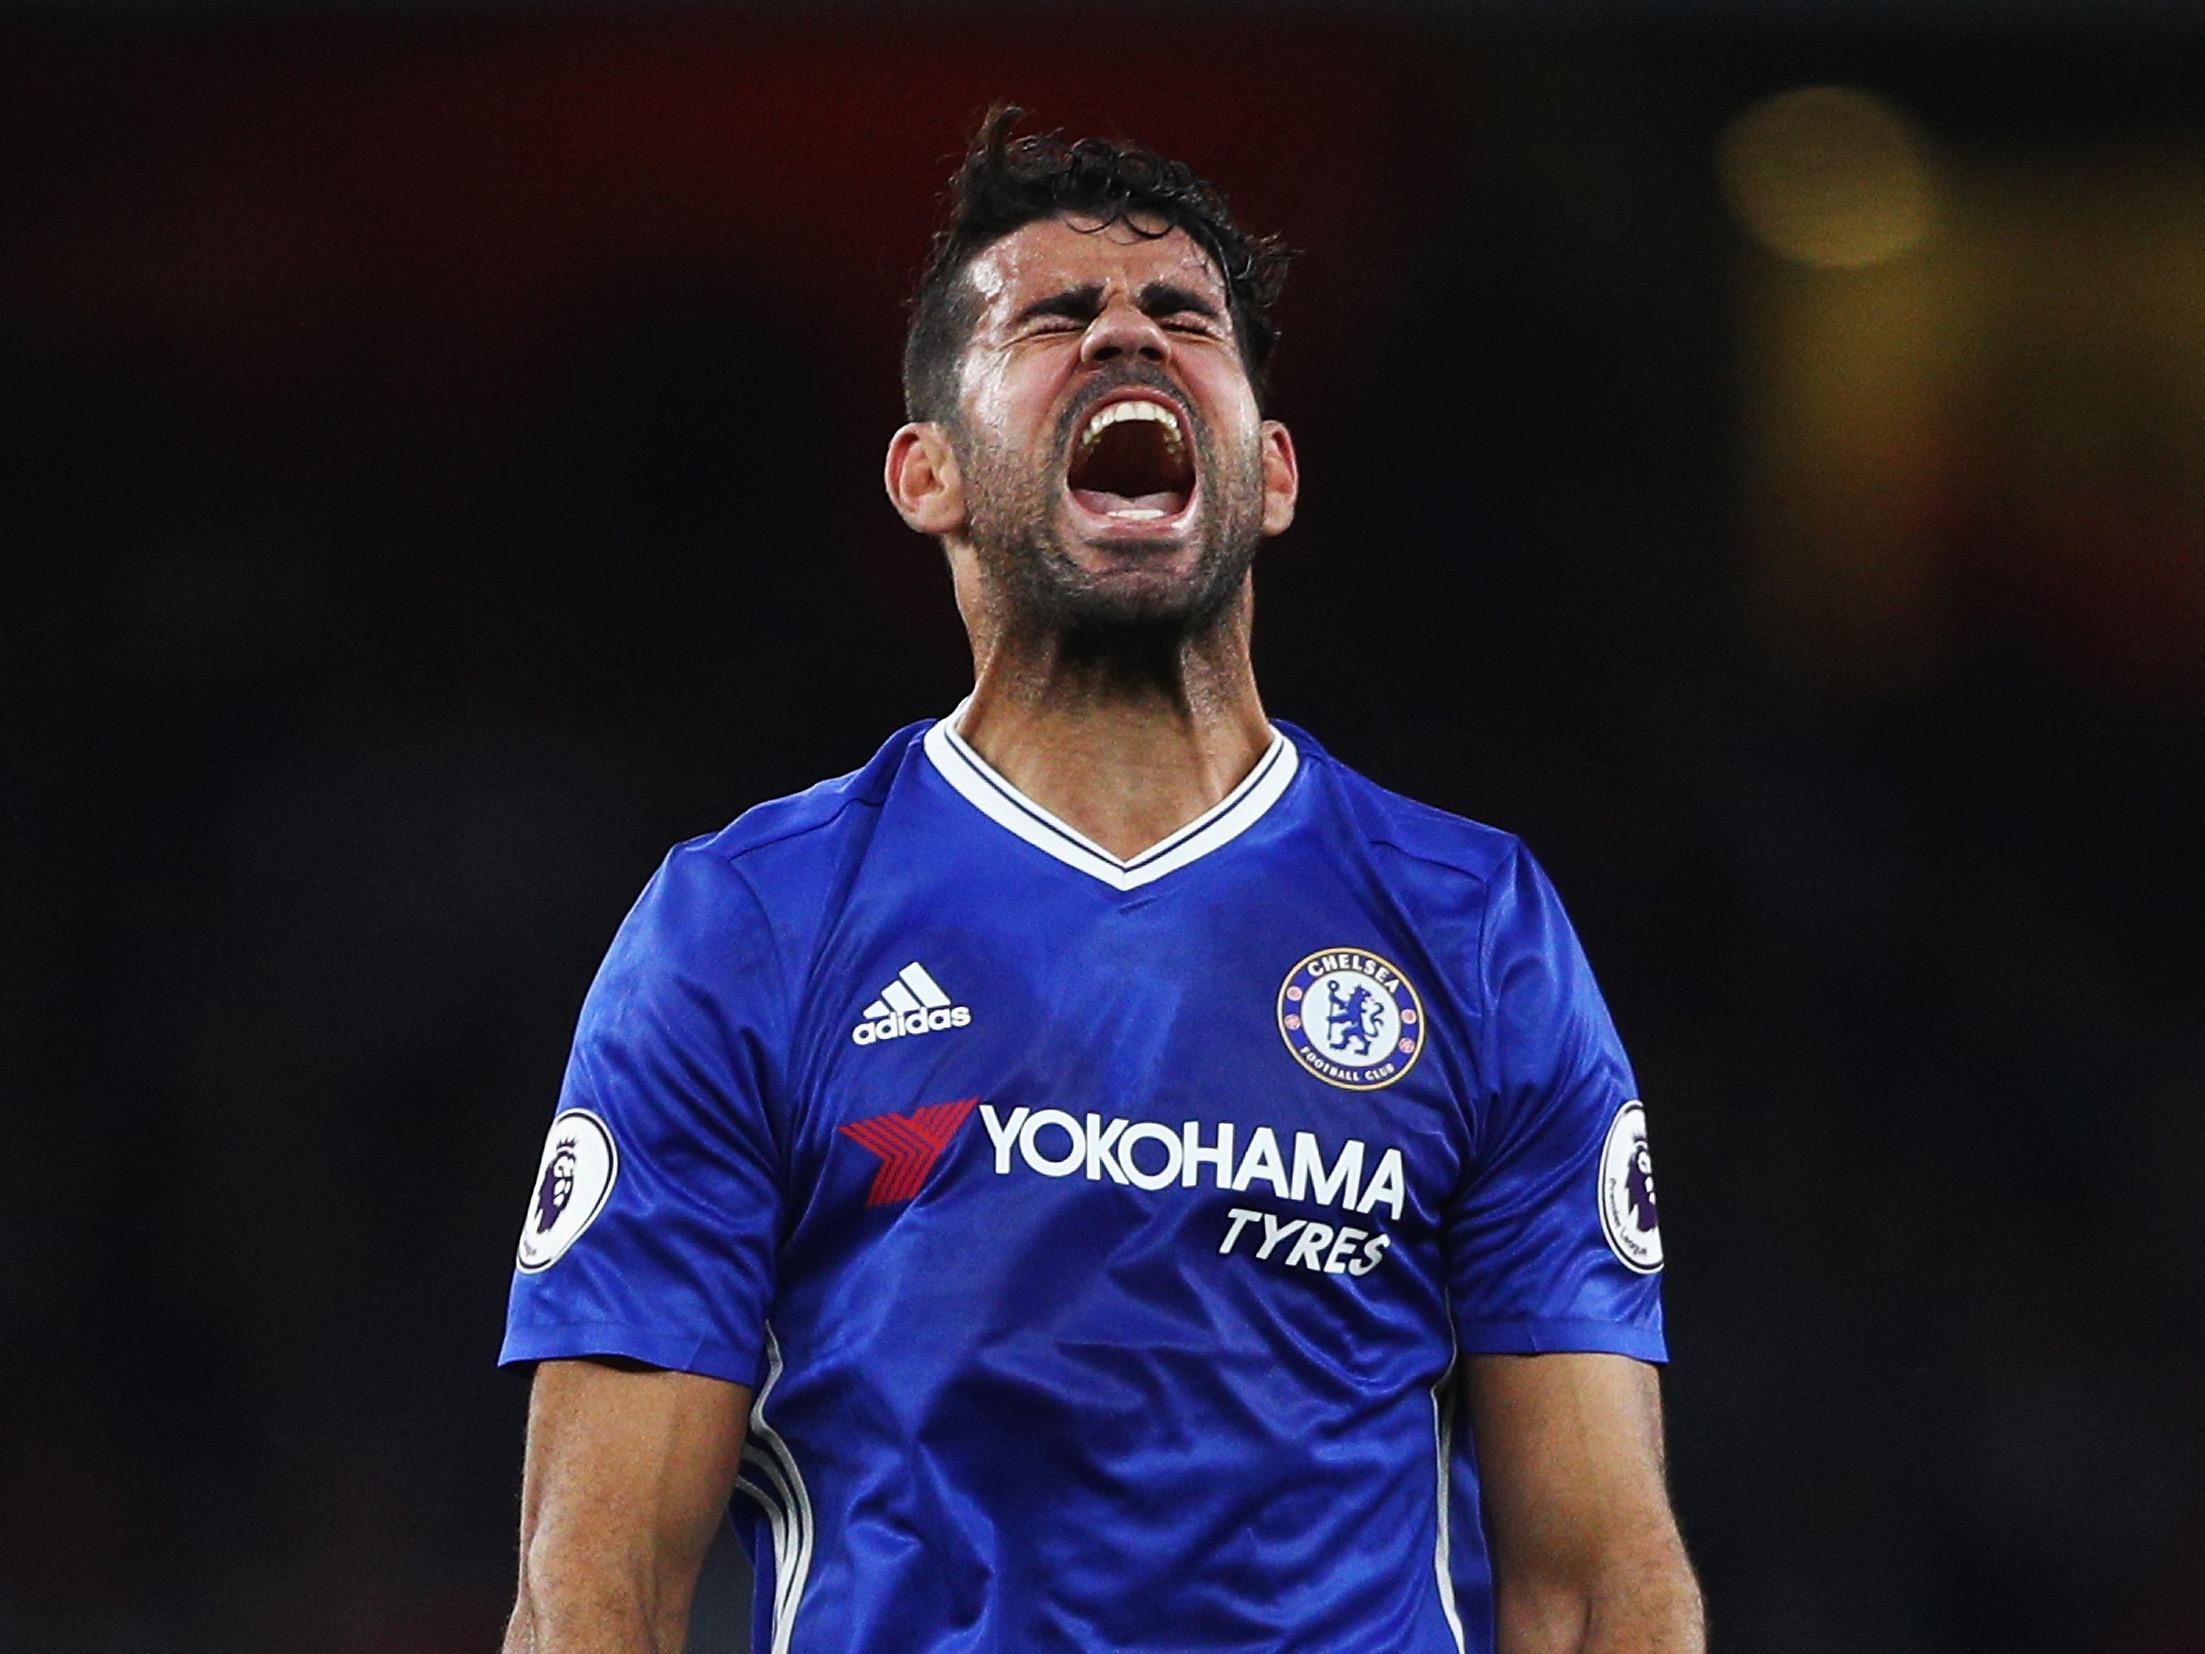 Diego Costa has refused to train with Chelsea's reserves and is being fined wages by the club as a result